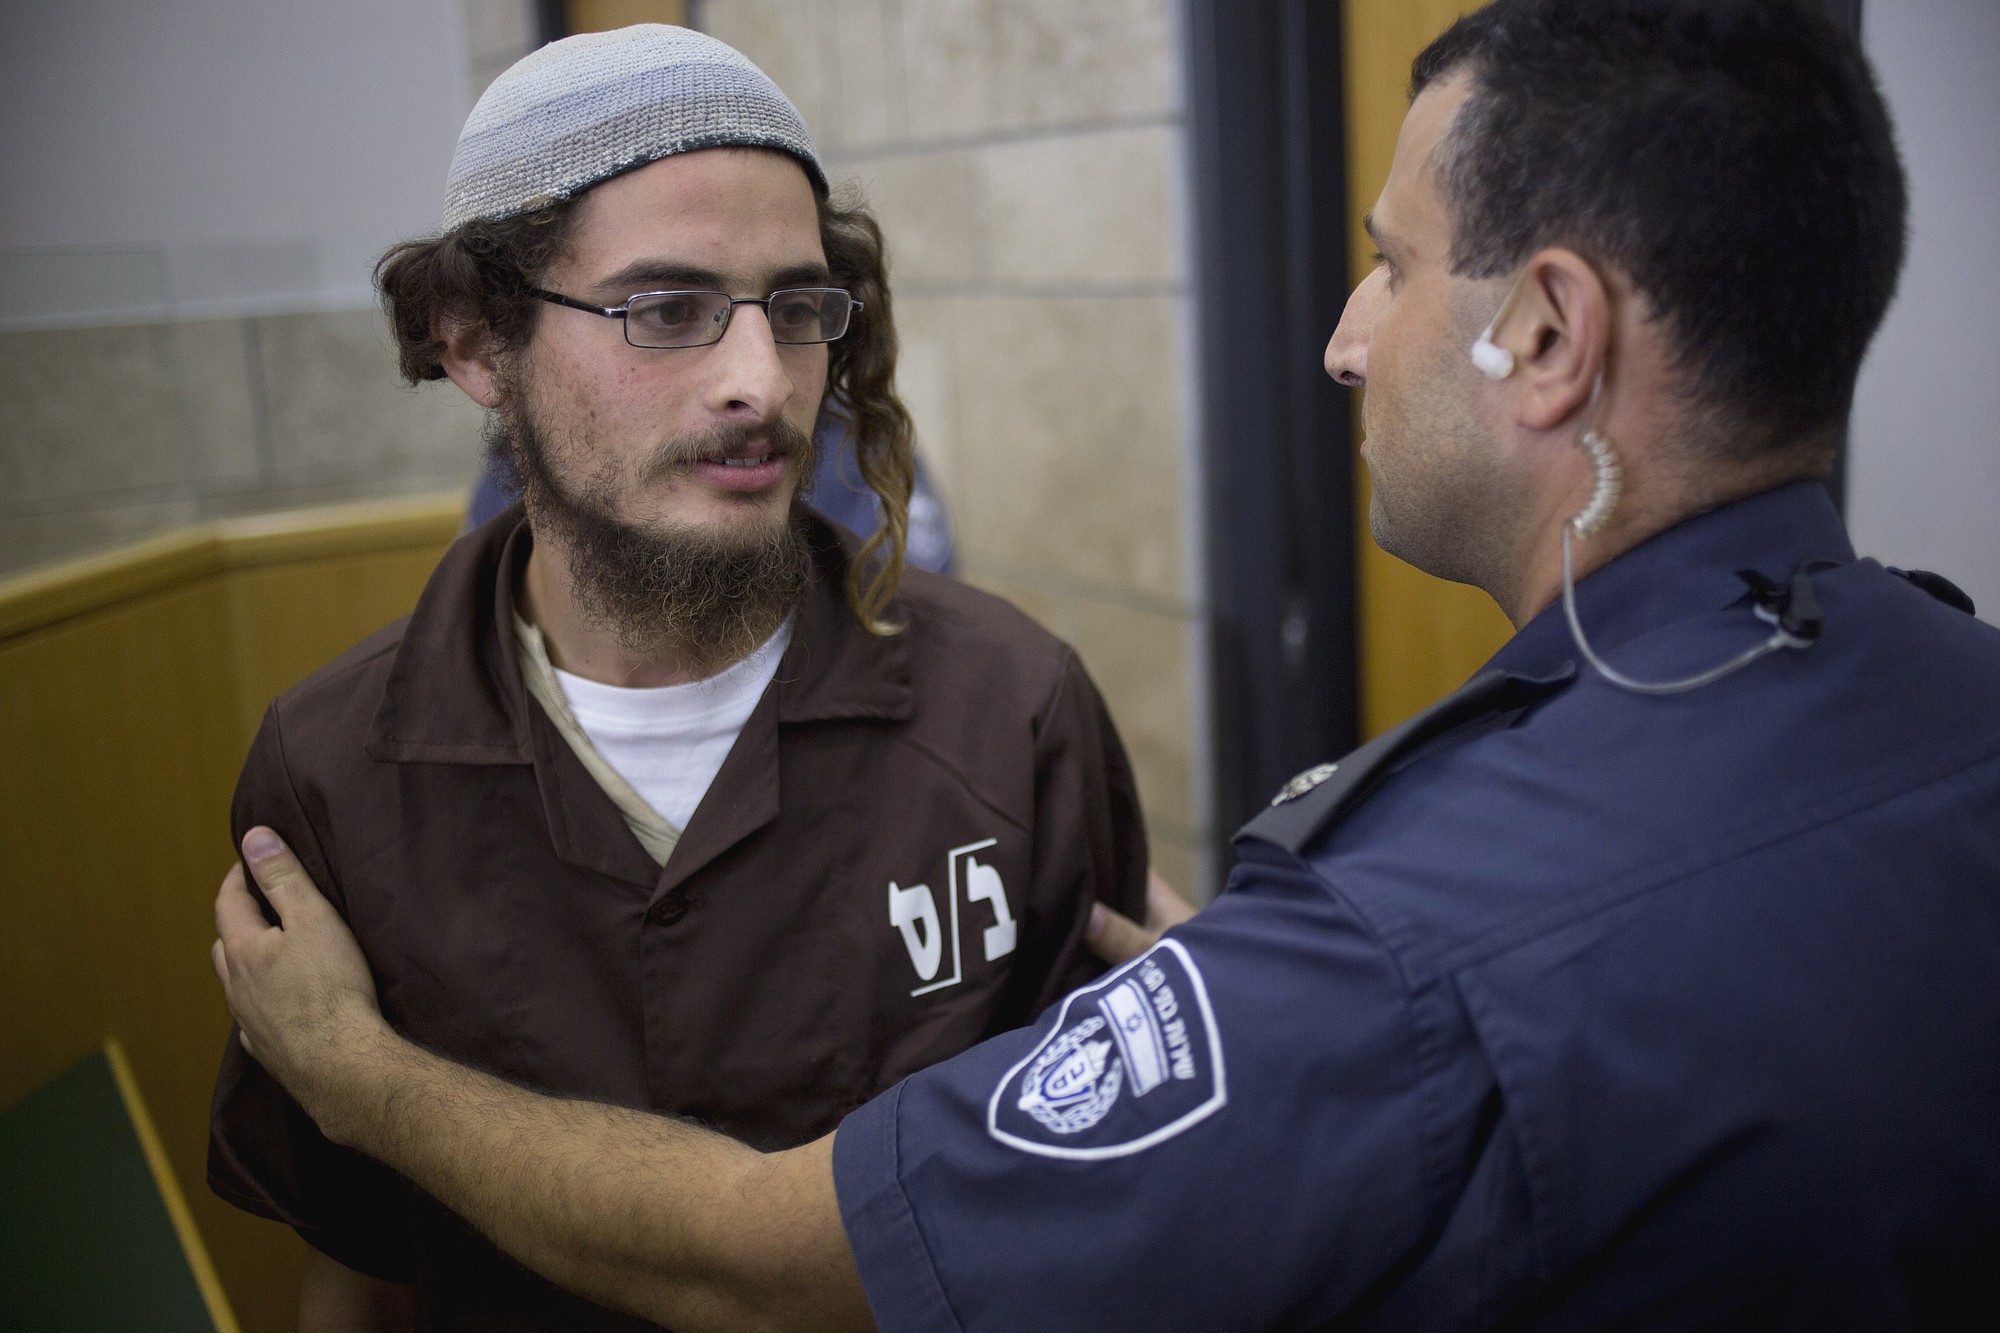 Meir Ettinger, 23, appears in court Tuesday in Nazareth Illit, Israel.